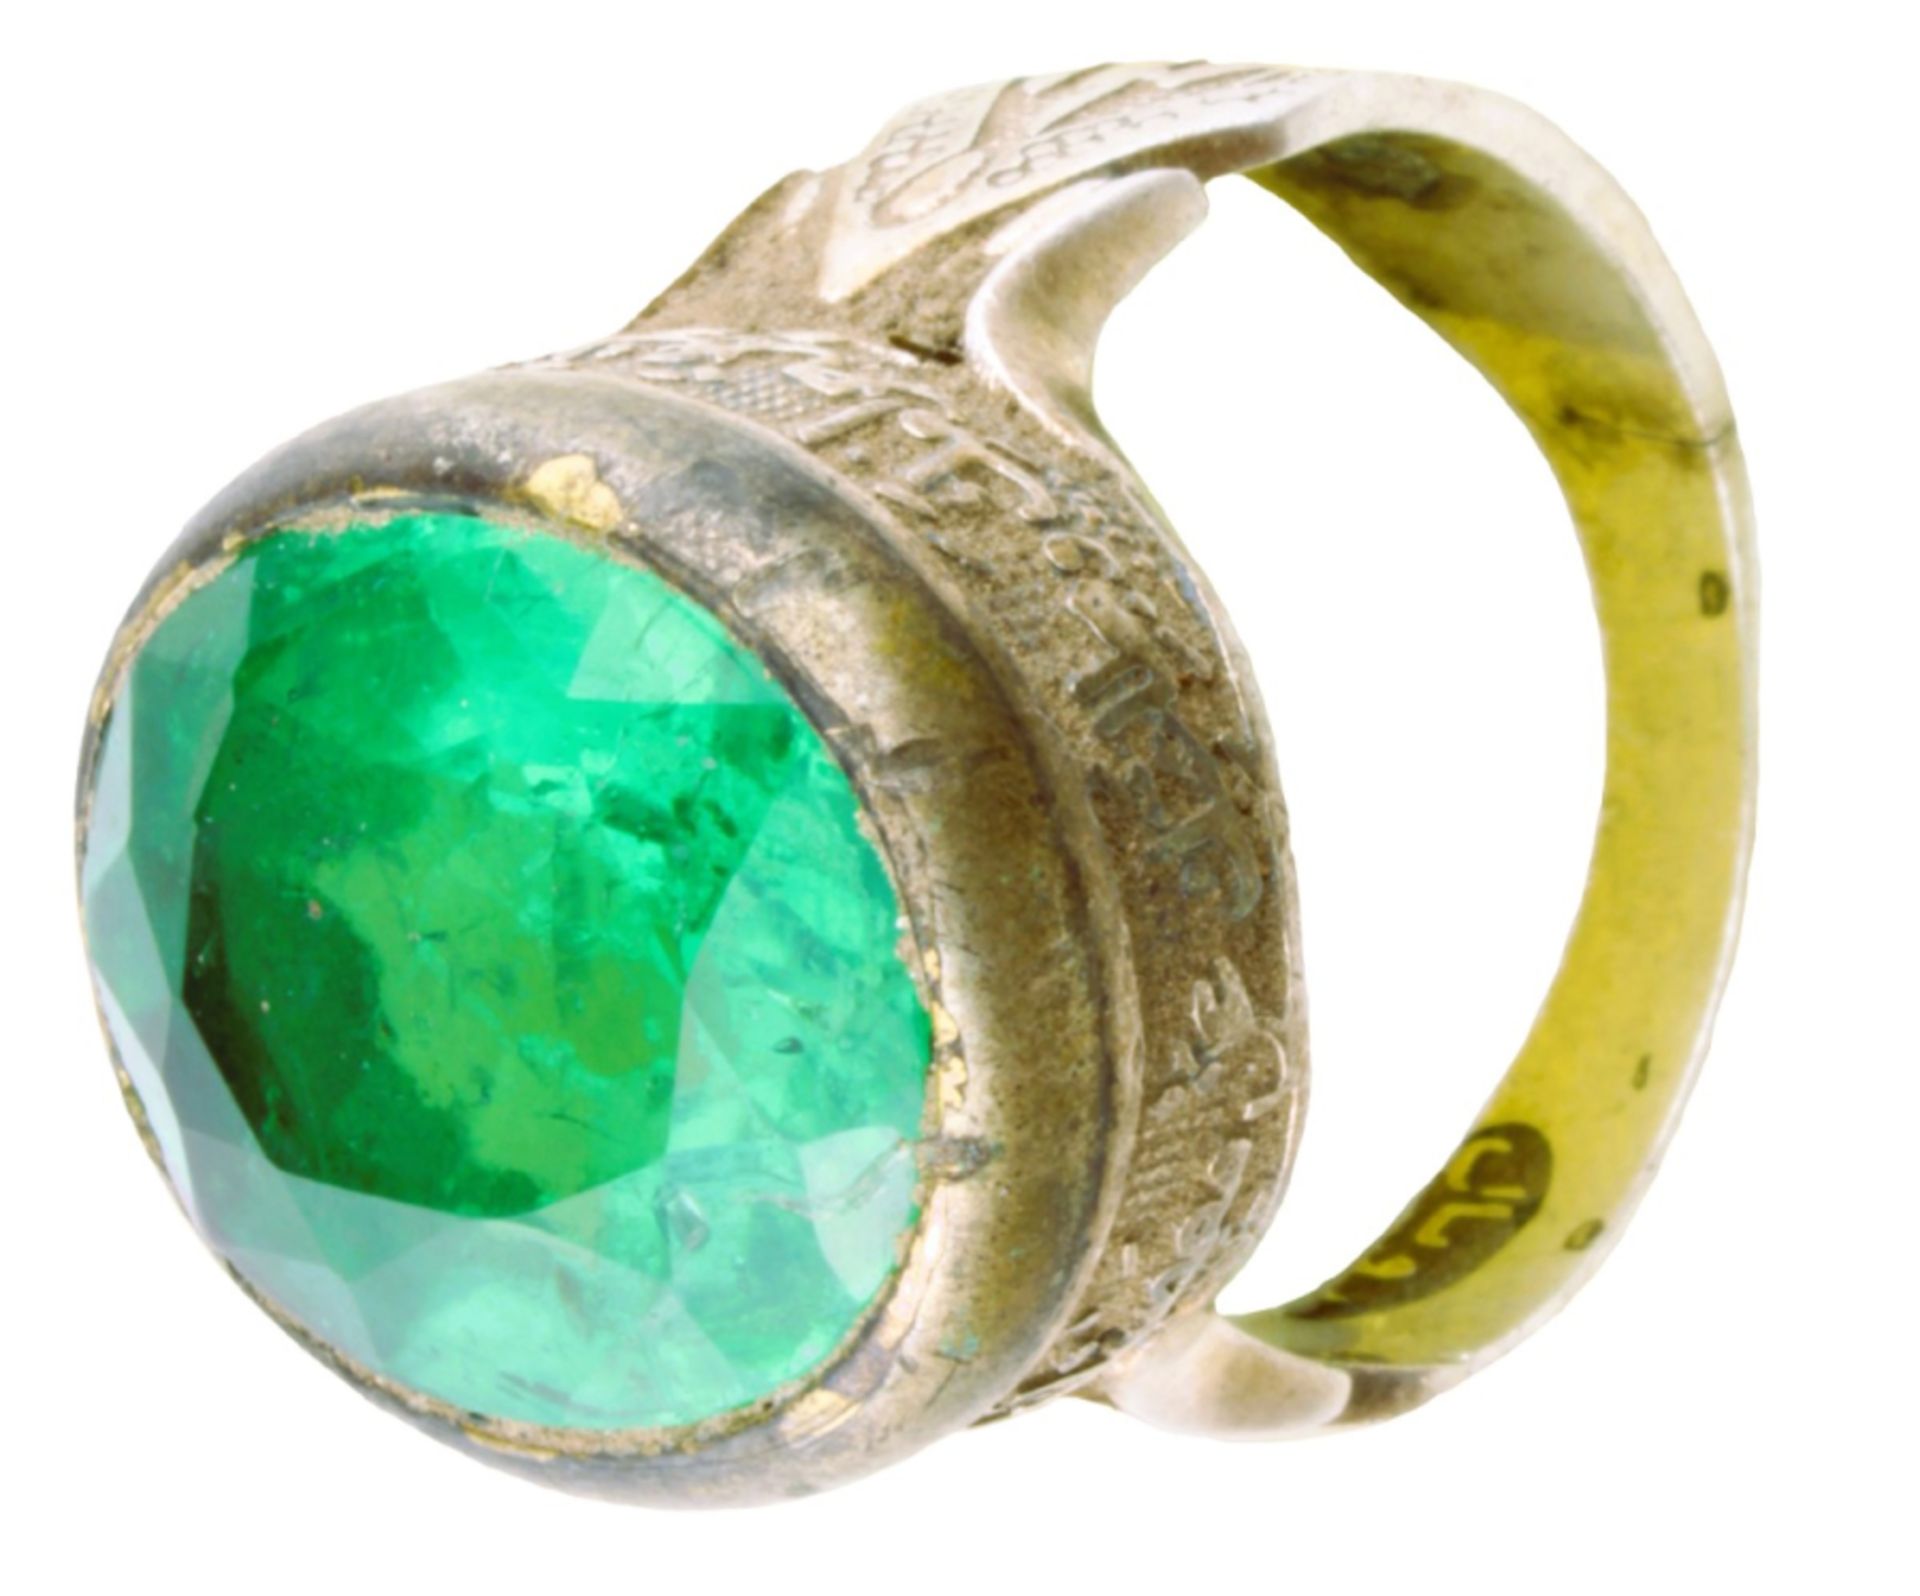 Silver ring with green stone engraved with islamic script - Image 2 of 7